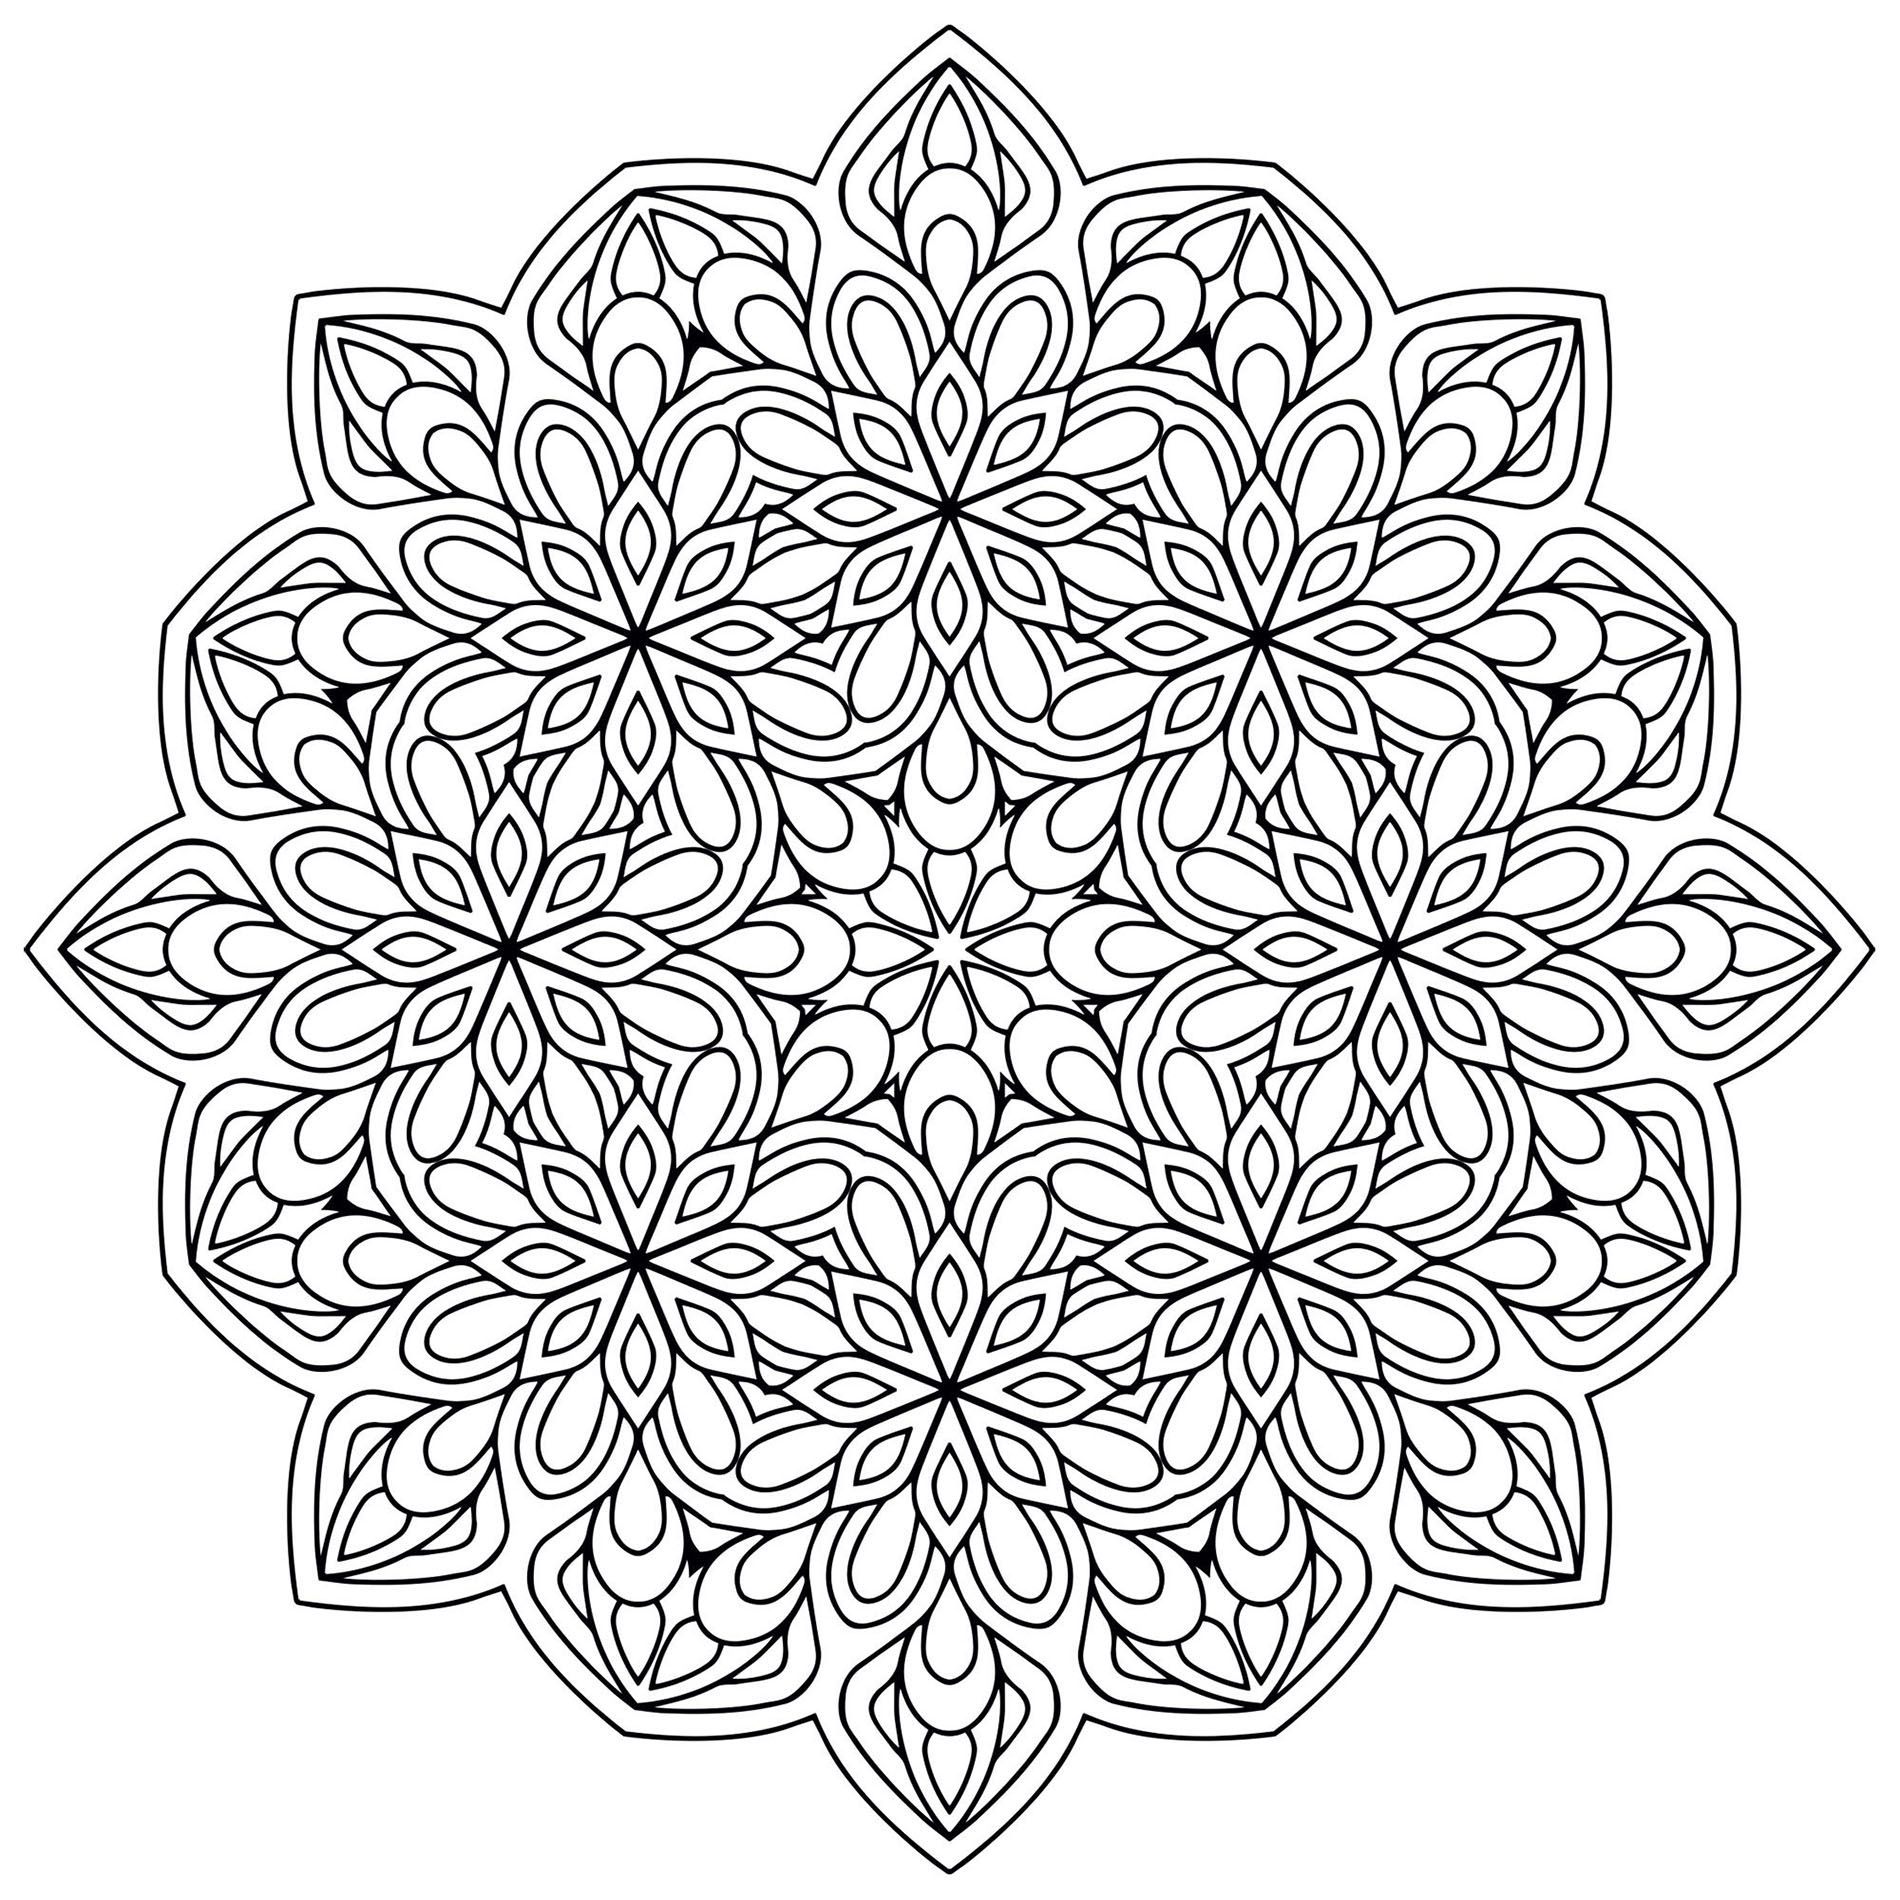 Mandala to relax and unwind